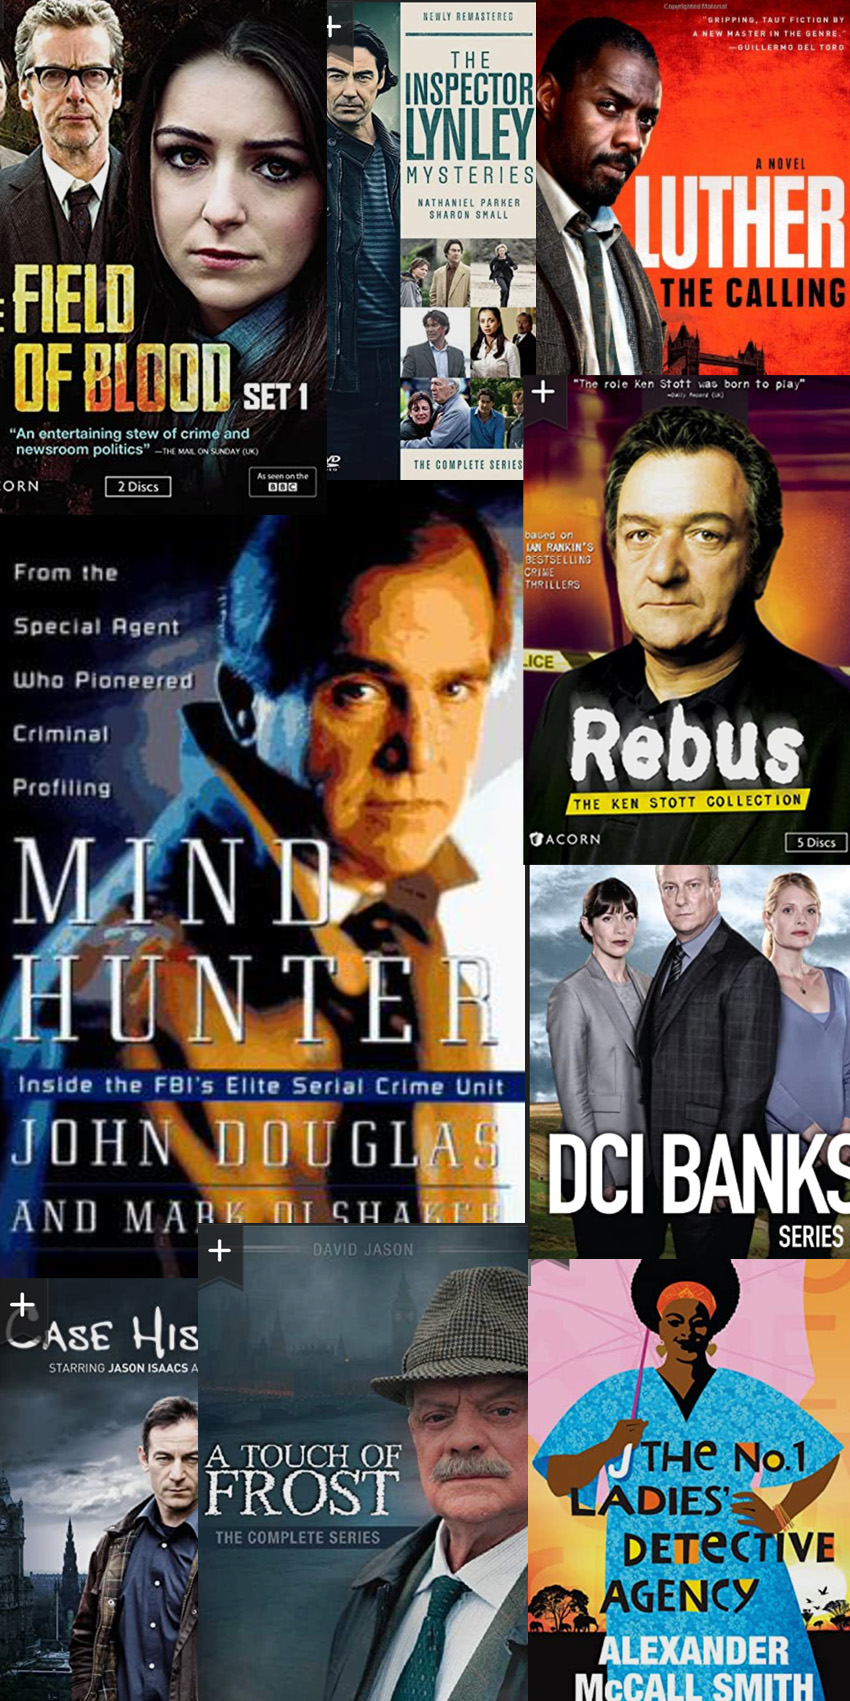 Rebus, DI Banks, Luther, Mindhunters, Inspector Linley